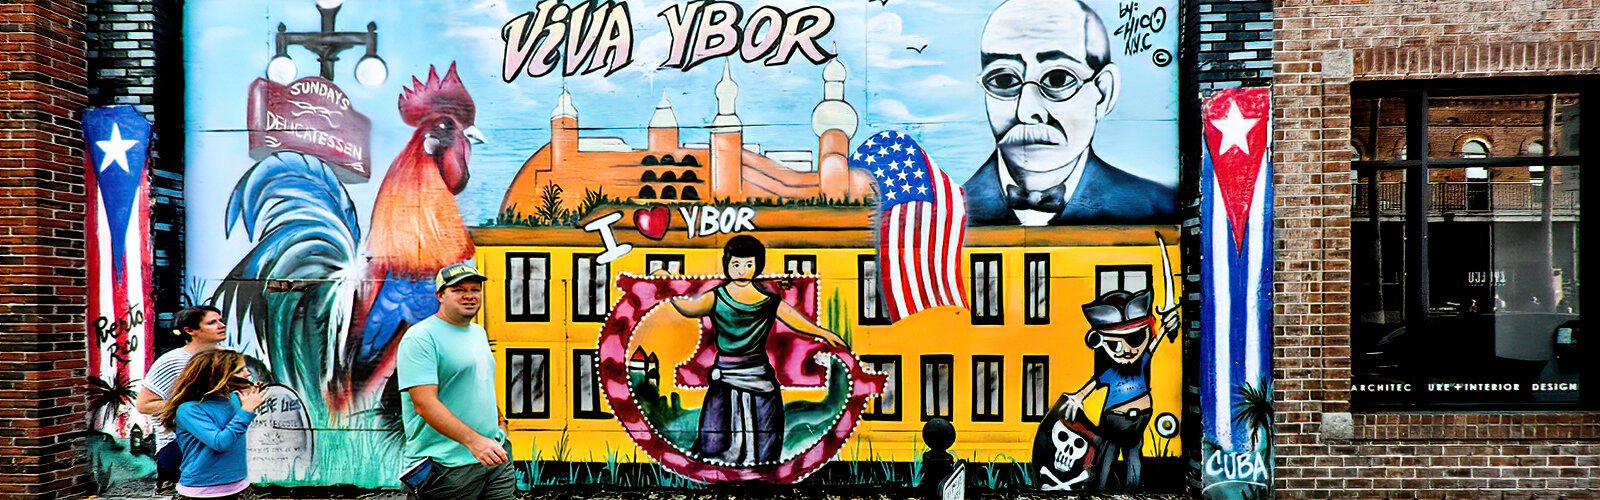 Founded by Vicente Martinez-Ybor in the 1880s and honored by many murals, Ybor City is a historic multicultural neighborhood northeast of downtown Tampa.